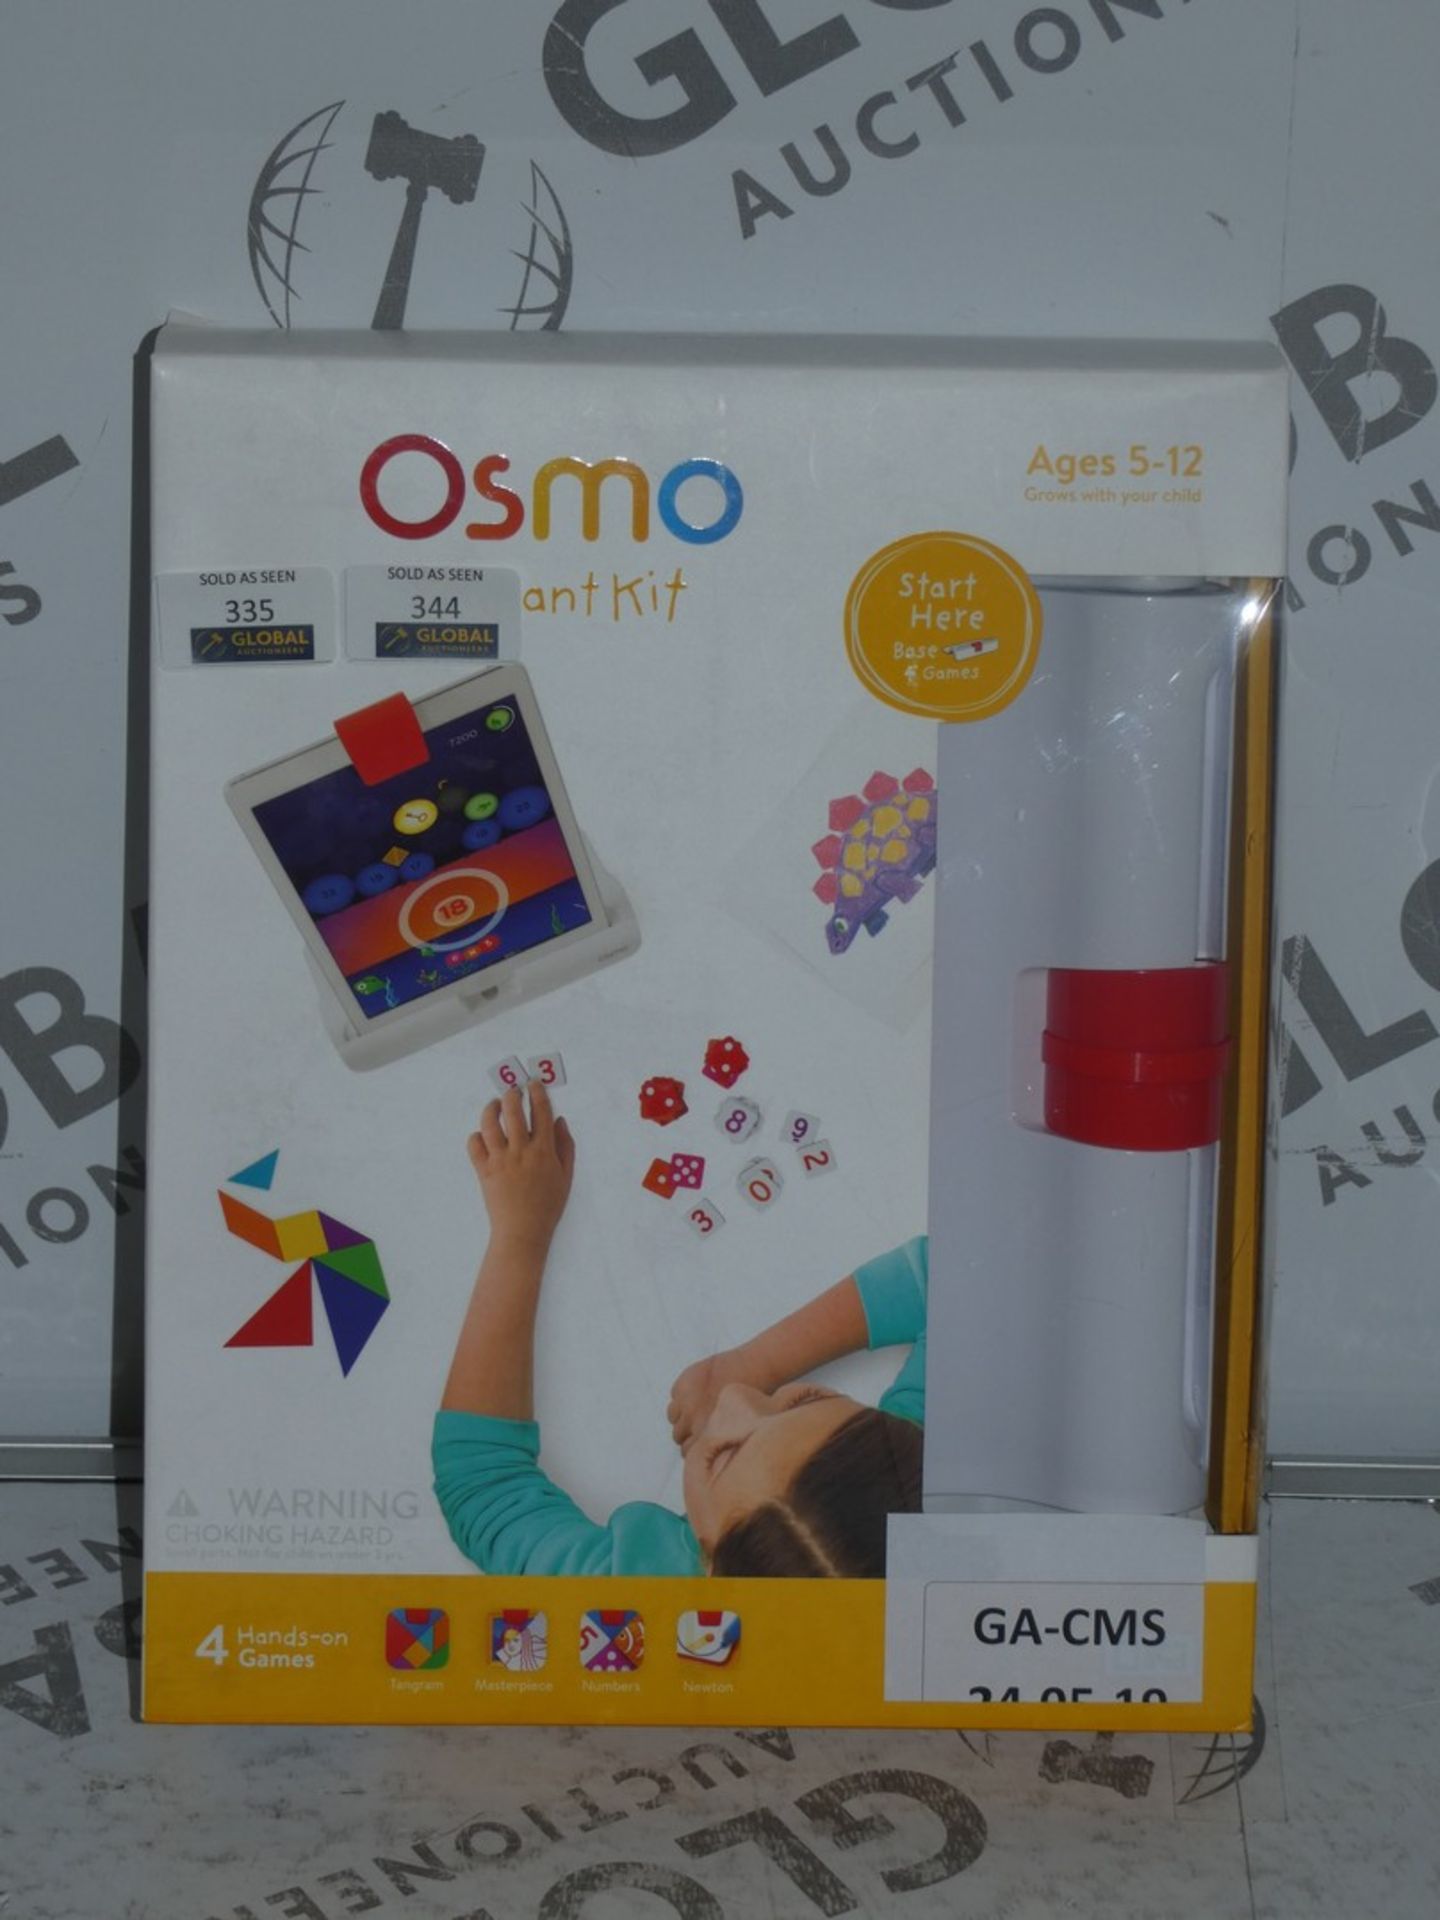 Made For Ipad Ages 5 - 12 Osmo Brilliant Kit RRP £80